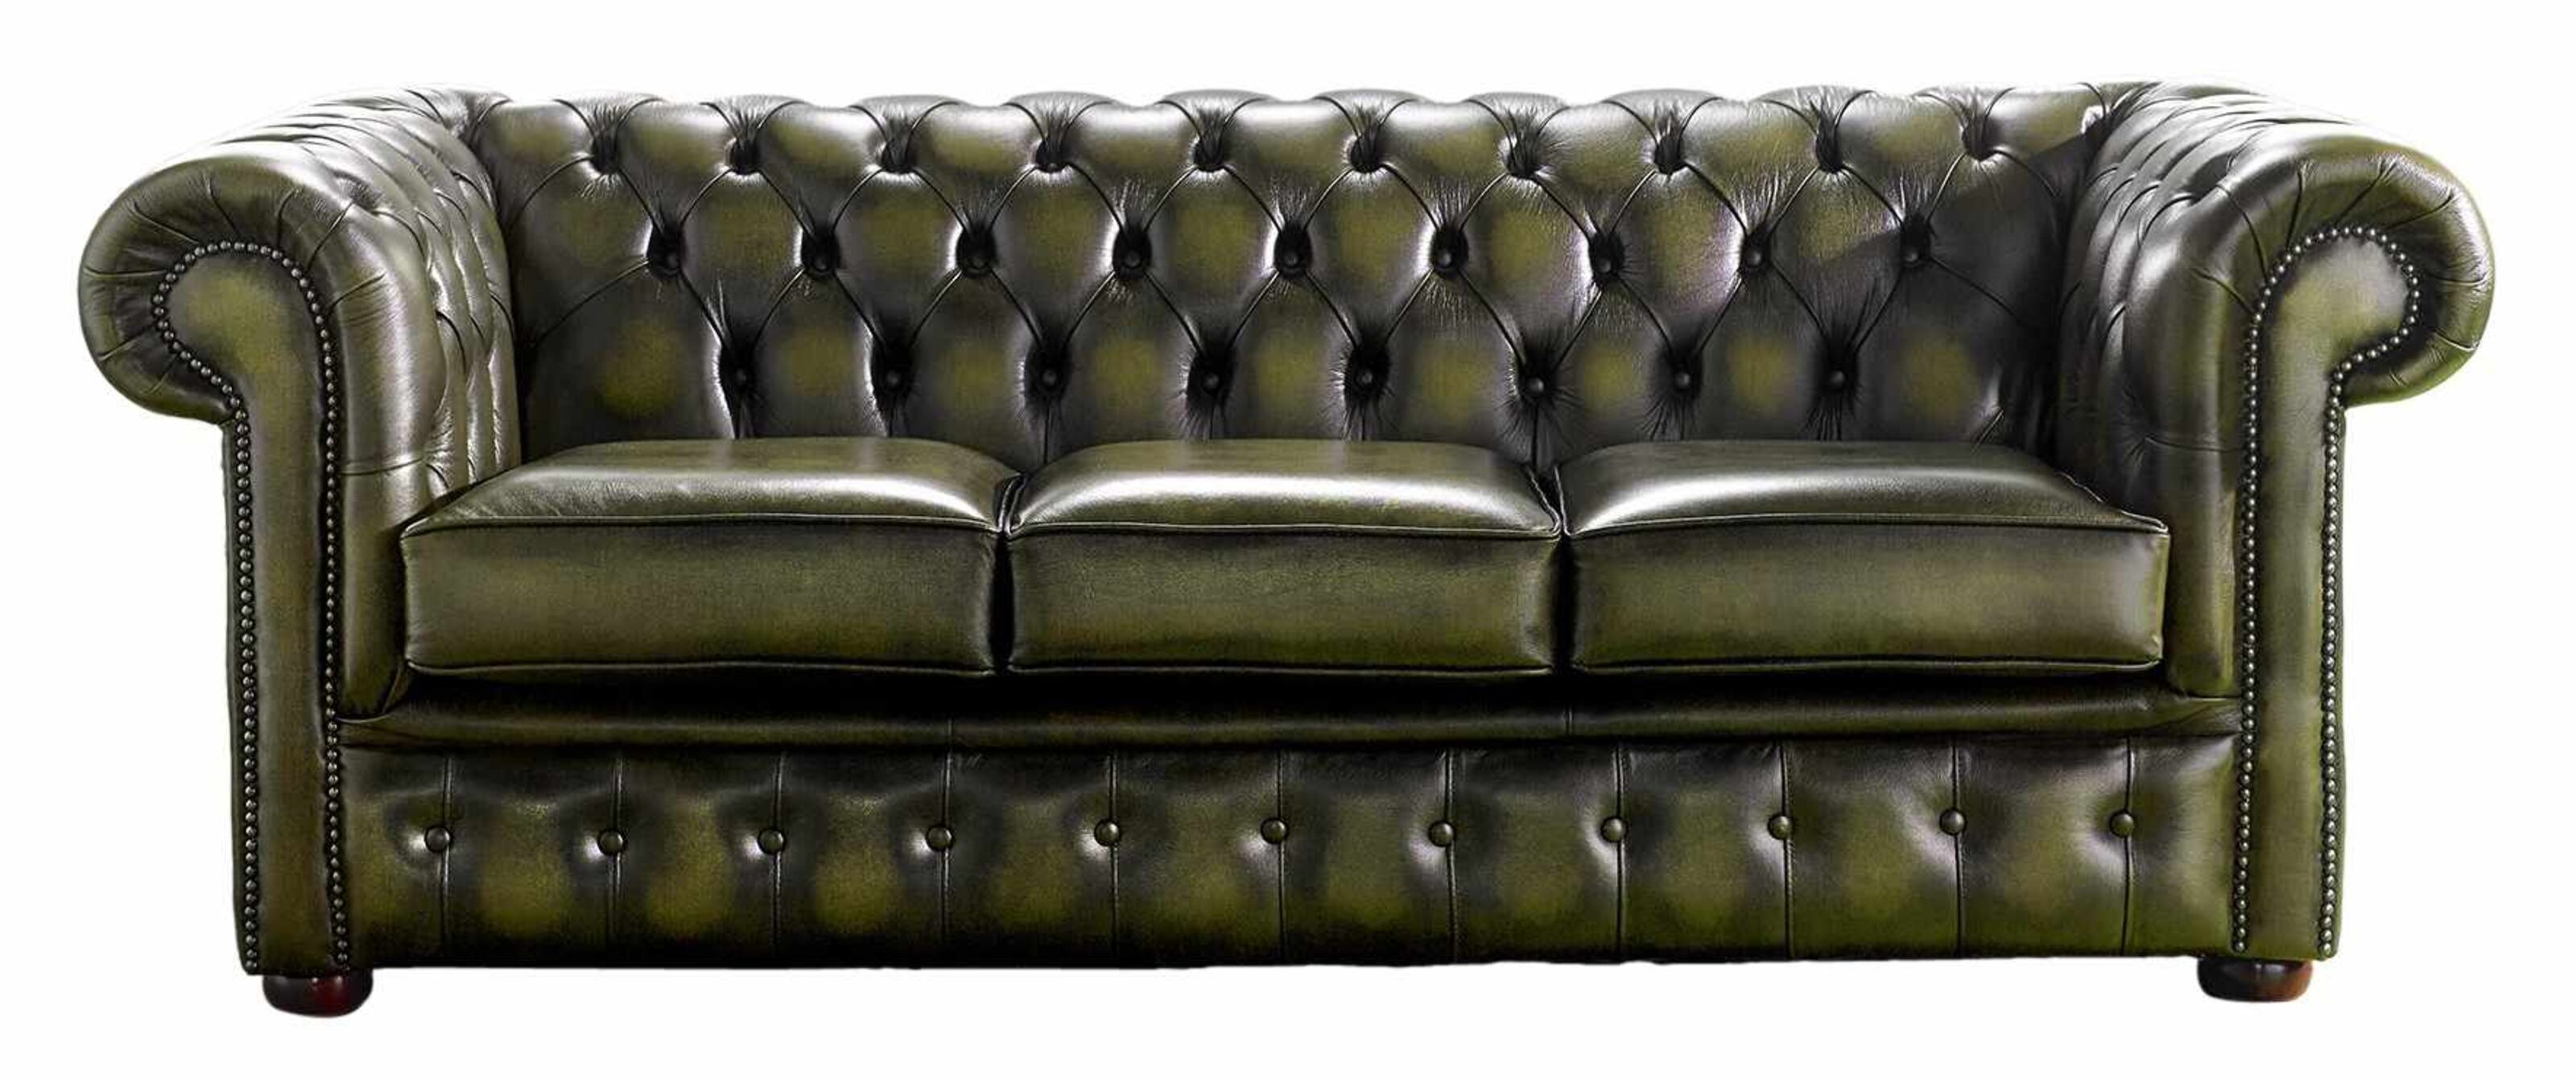 Timeless Charm Incorporating a Chesterfield Sofa into Your Living Space  %Post Title